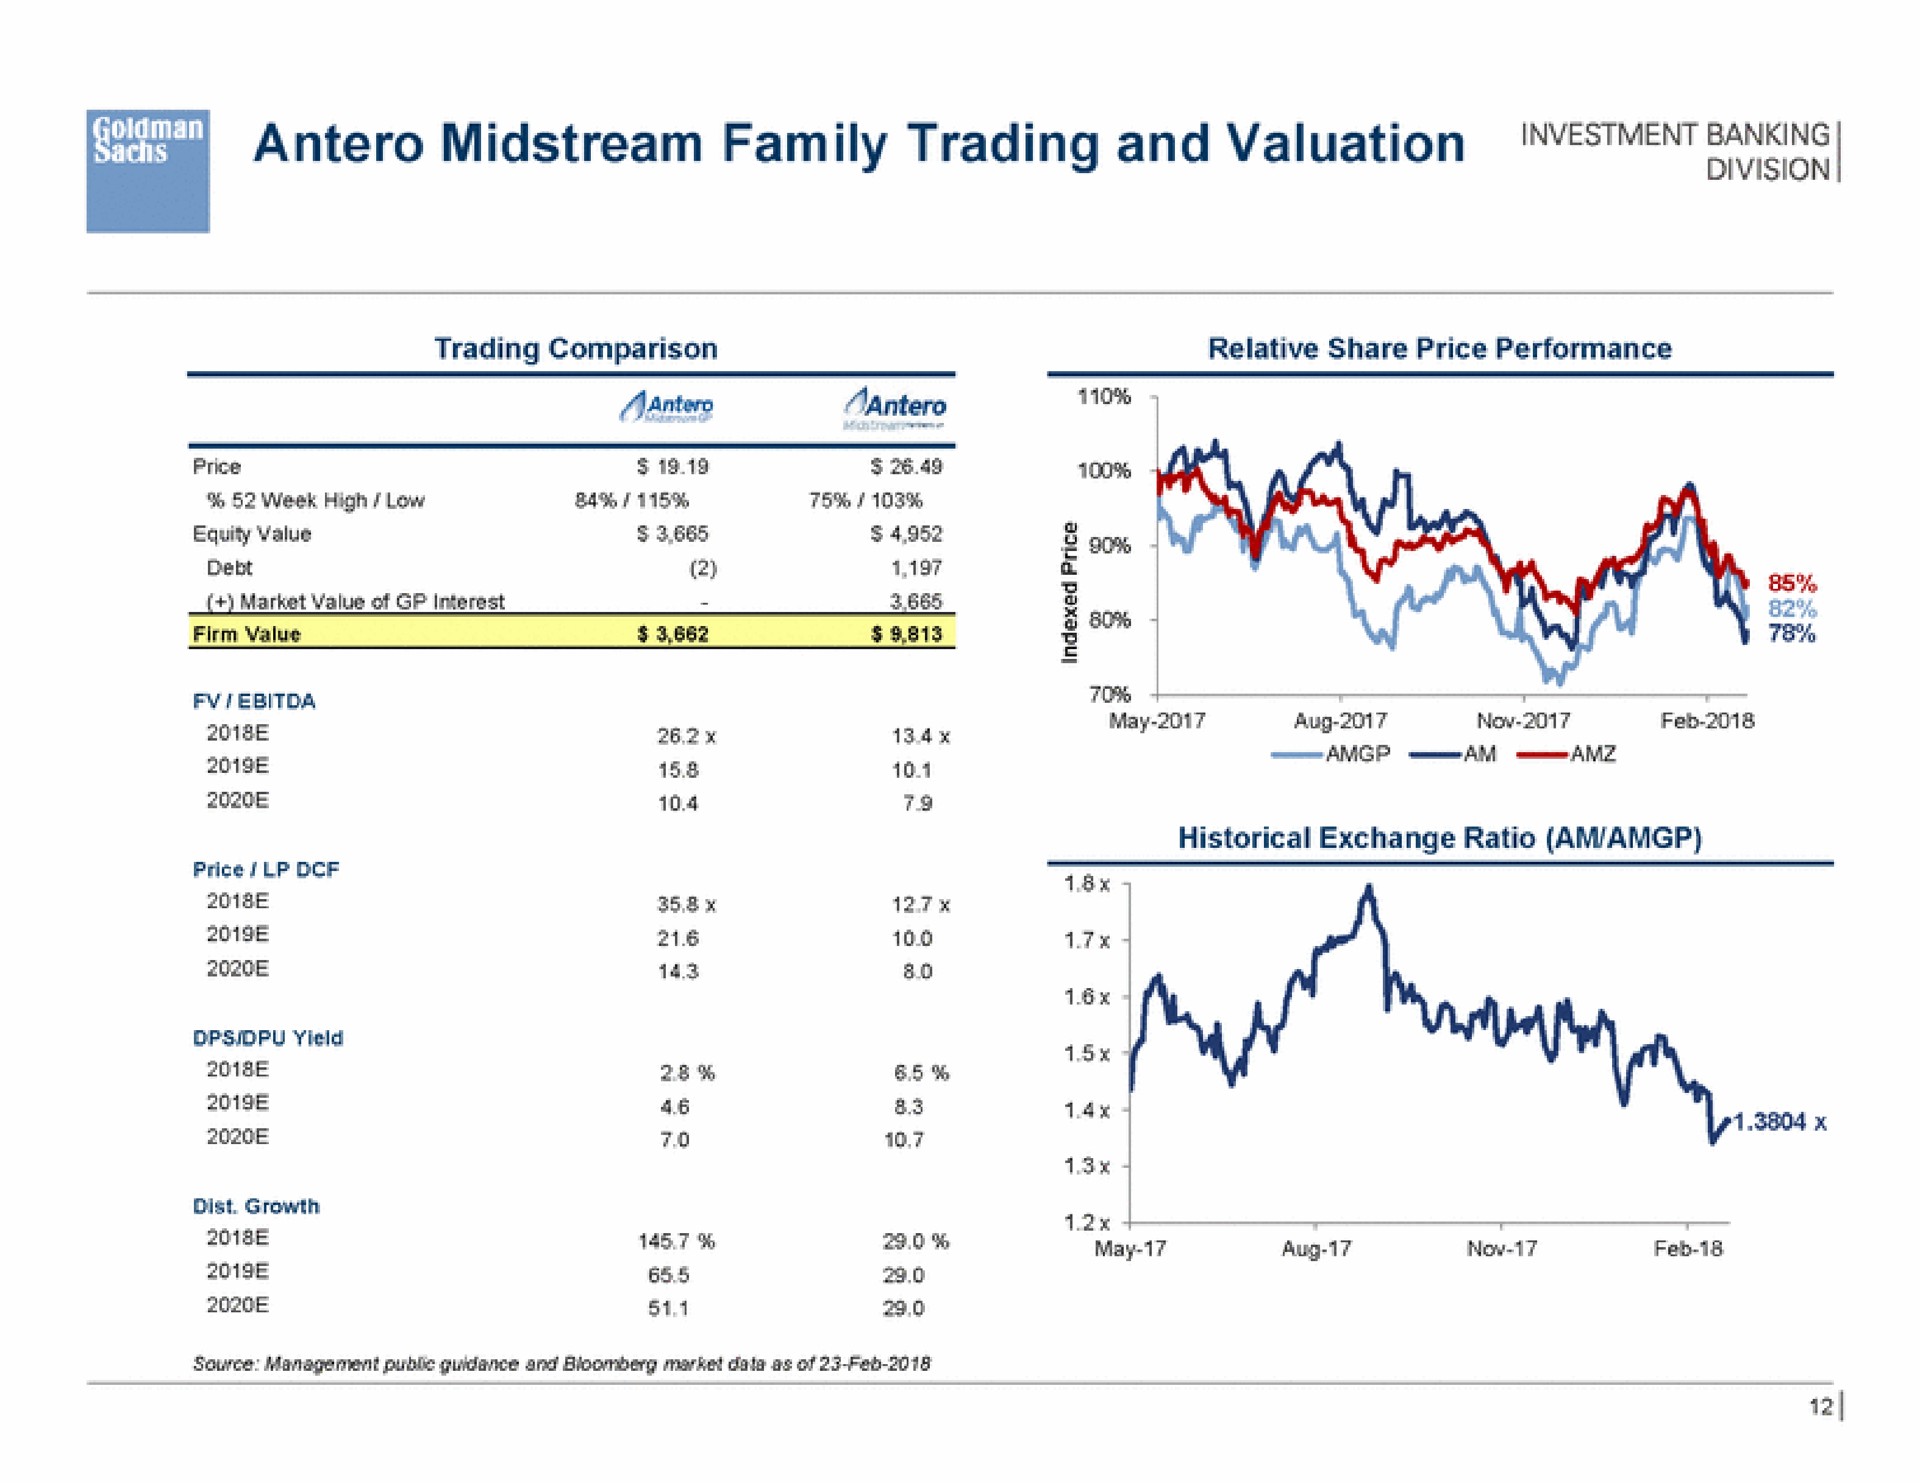 midstream family trading and valuation | Goldman Sachs